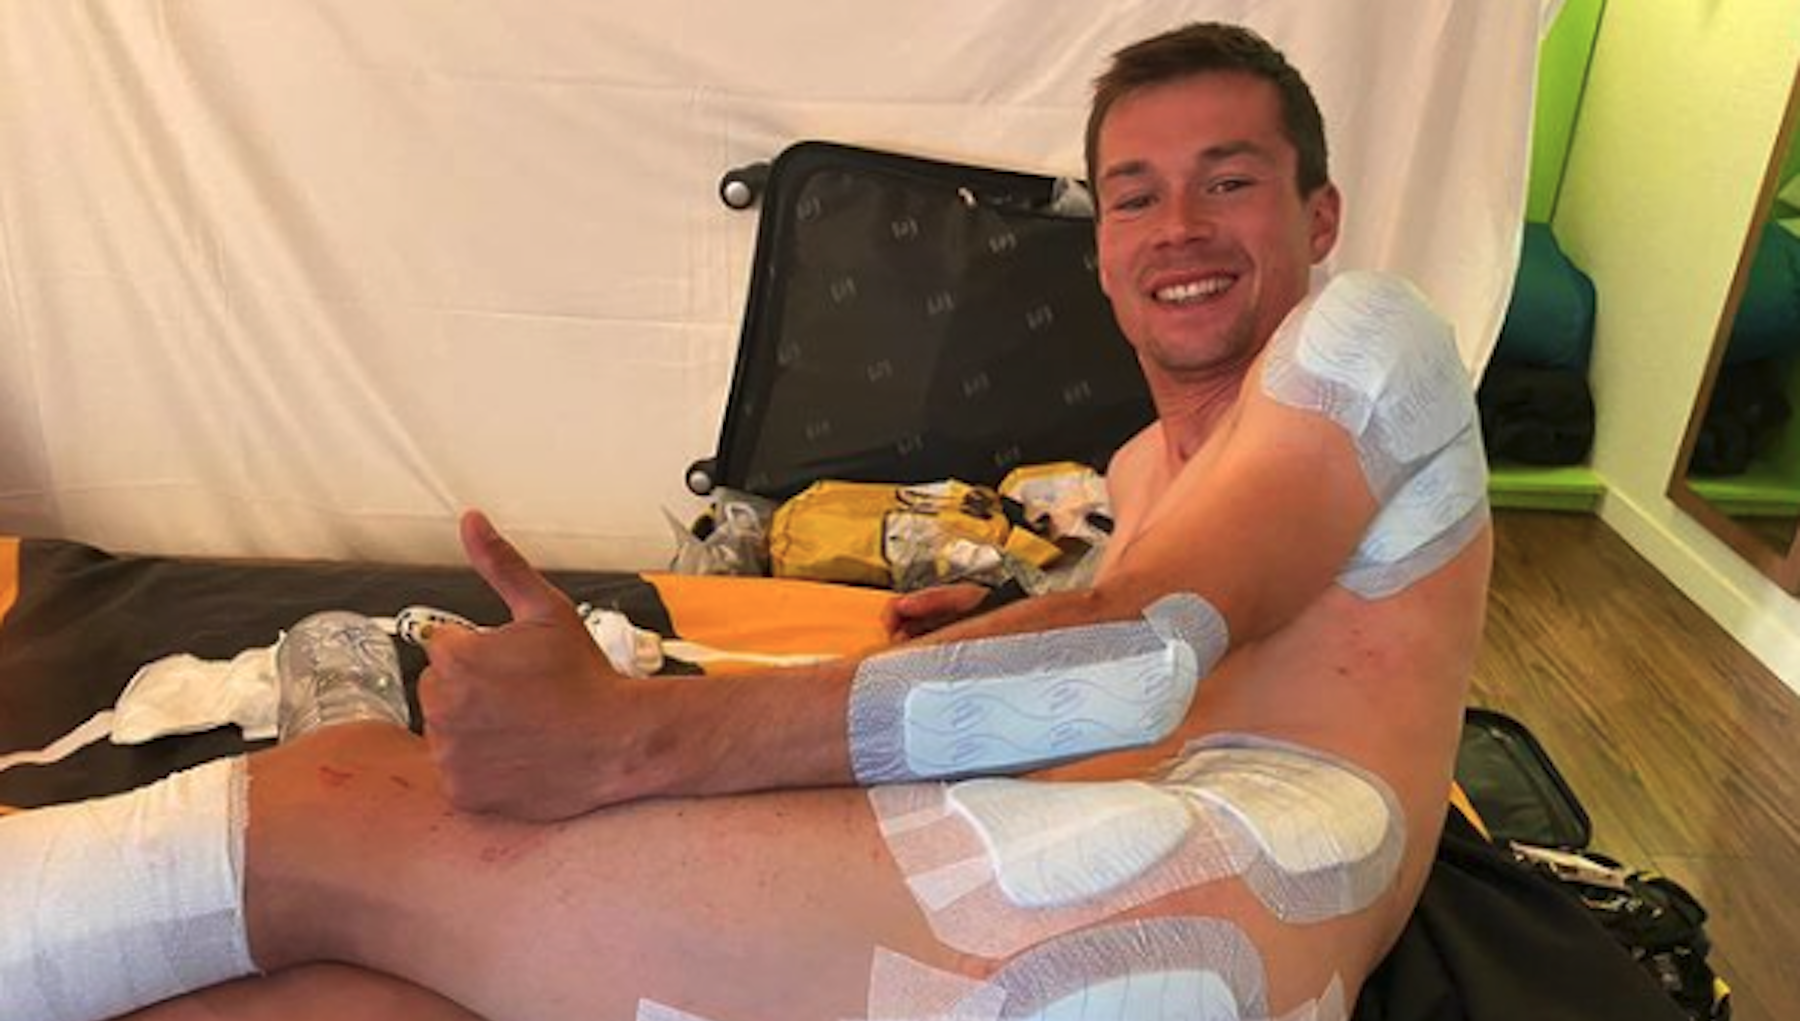 Primož Roglič bandaged up before the start of stage four of the Tour de France